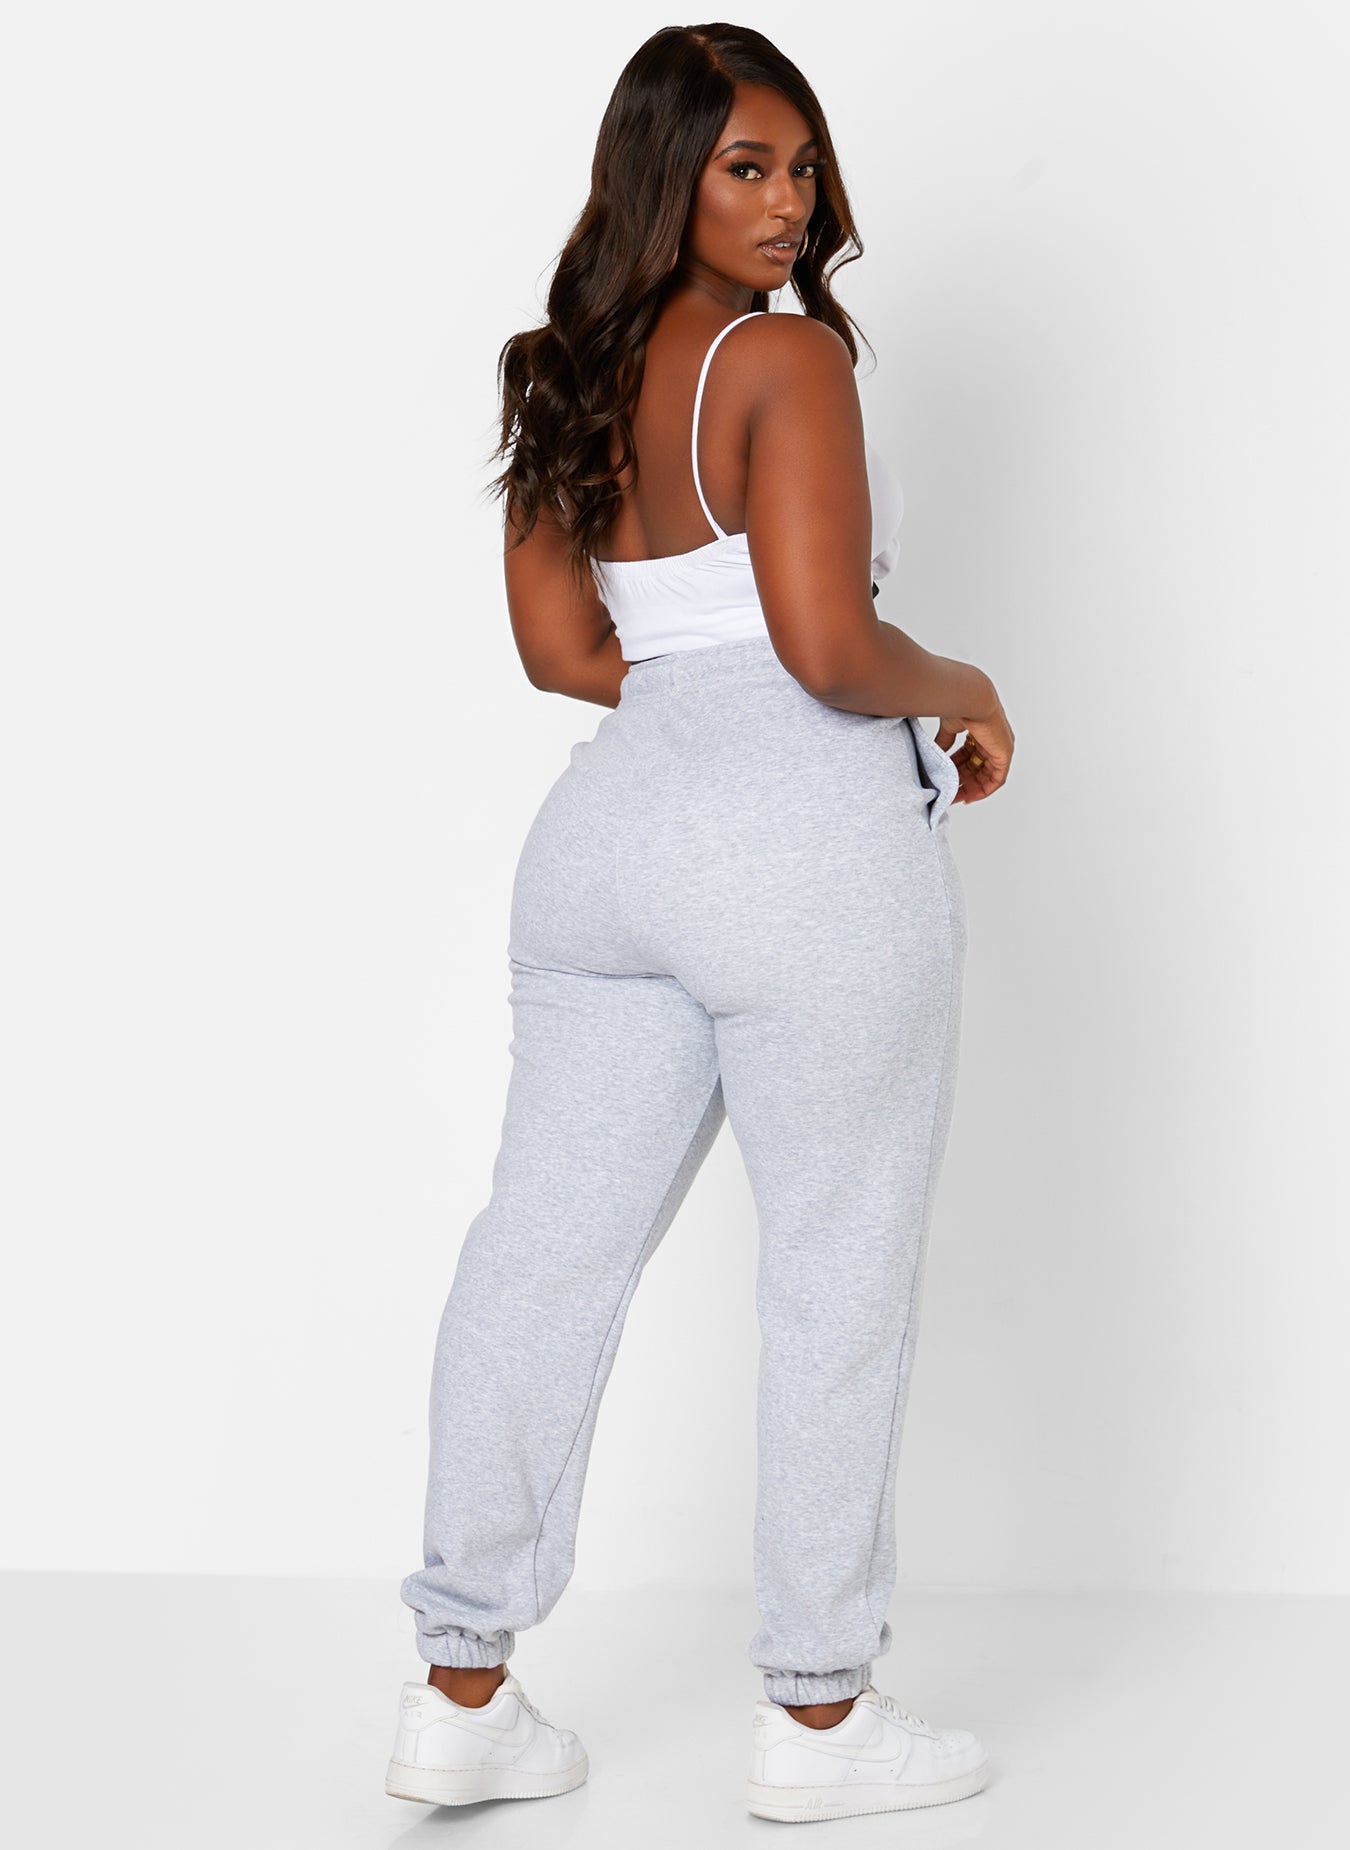 Heather Gray Goals Embroidered Drawstring Joggers W. Pockets Plus Sizes